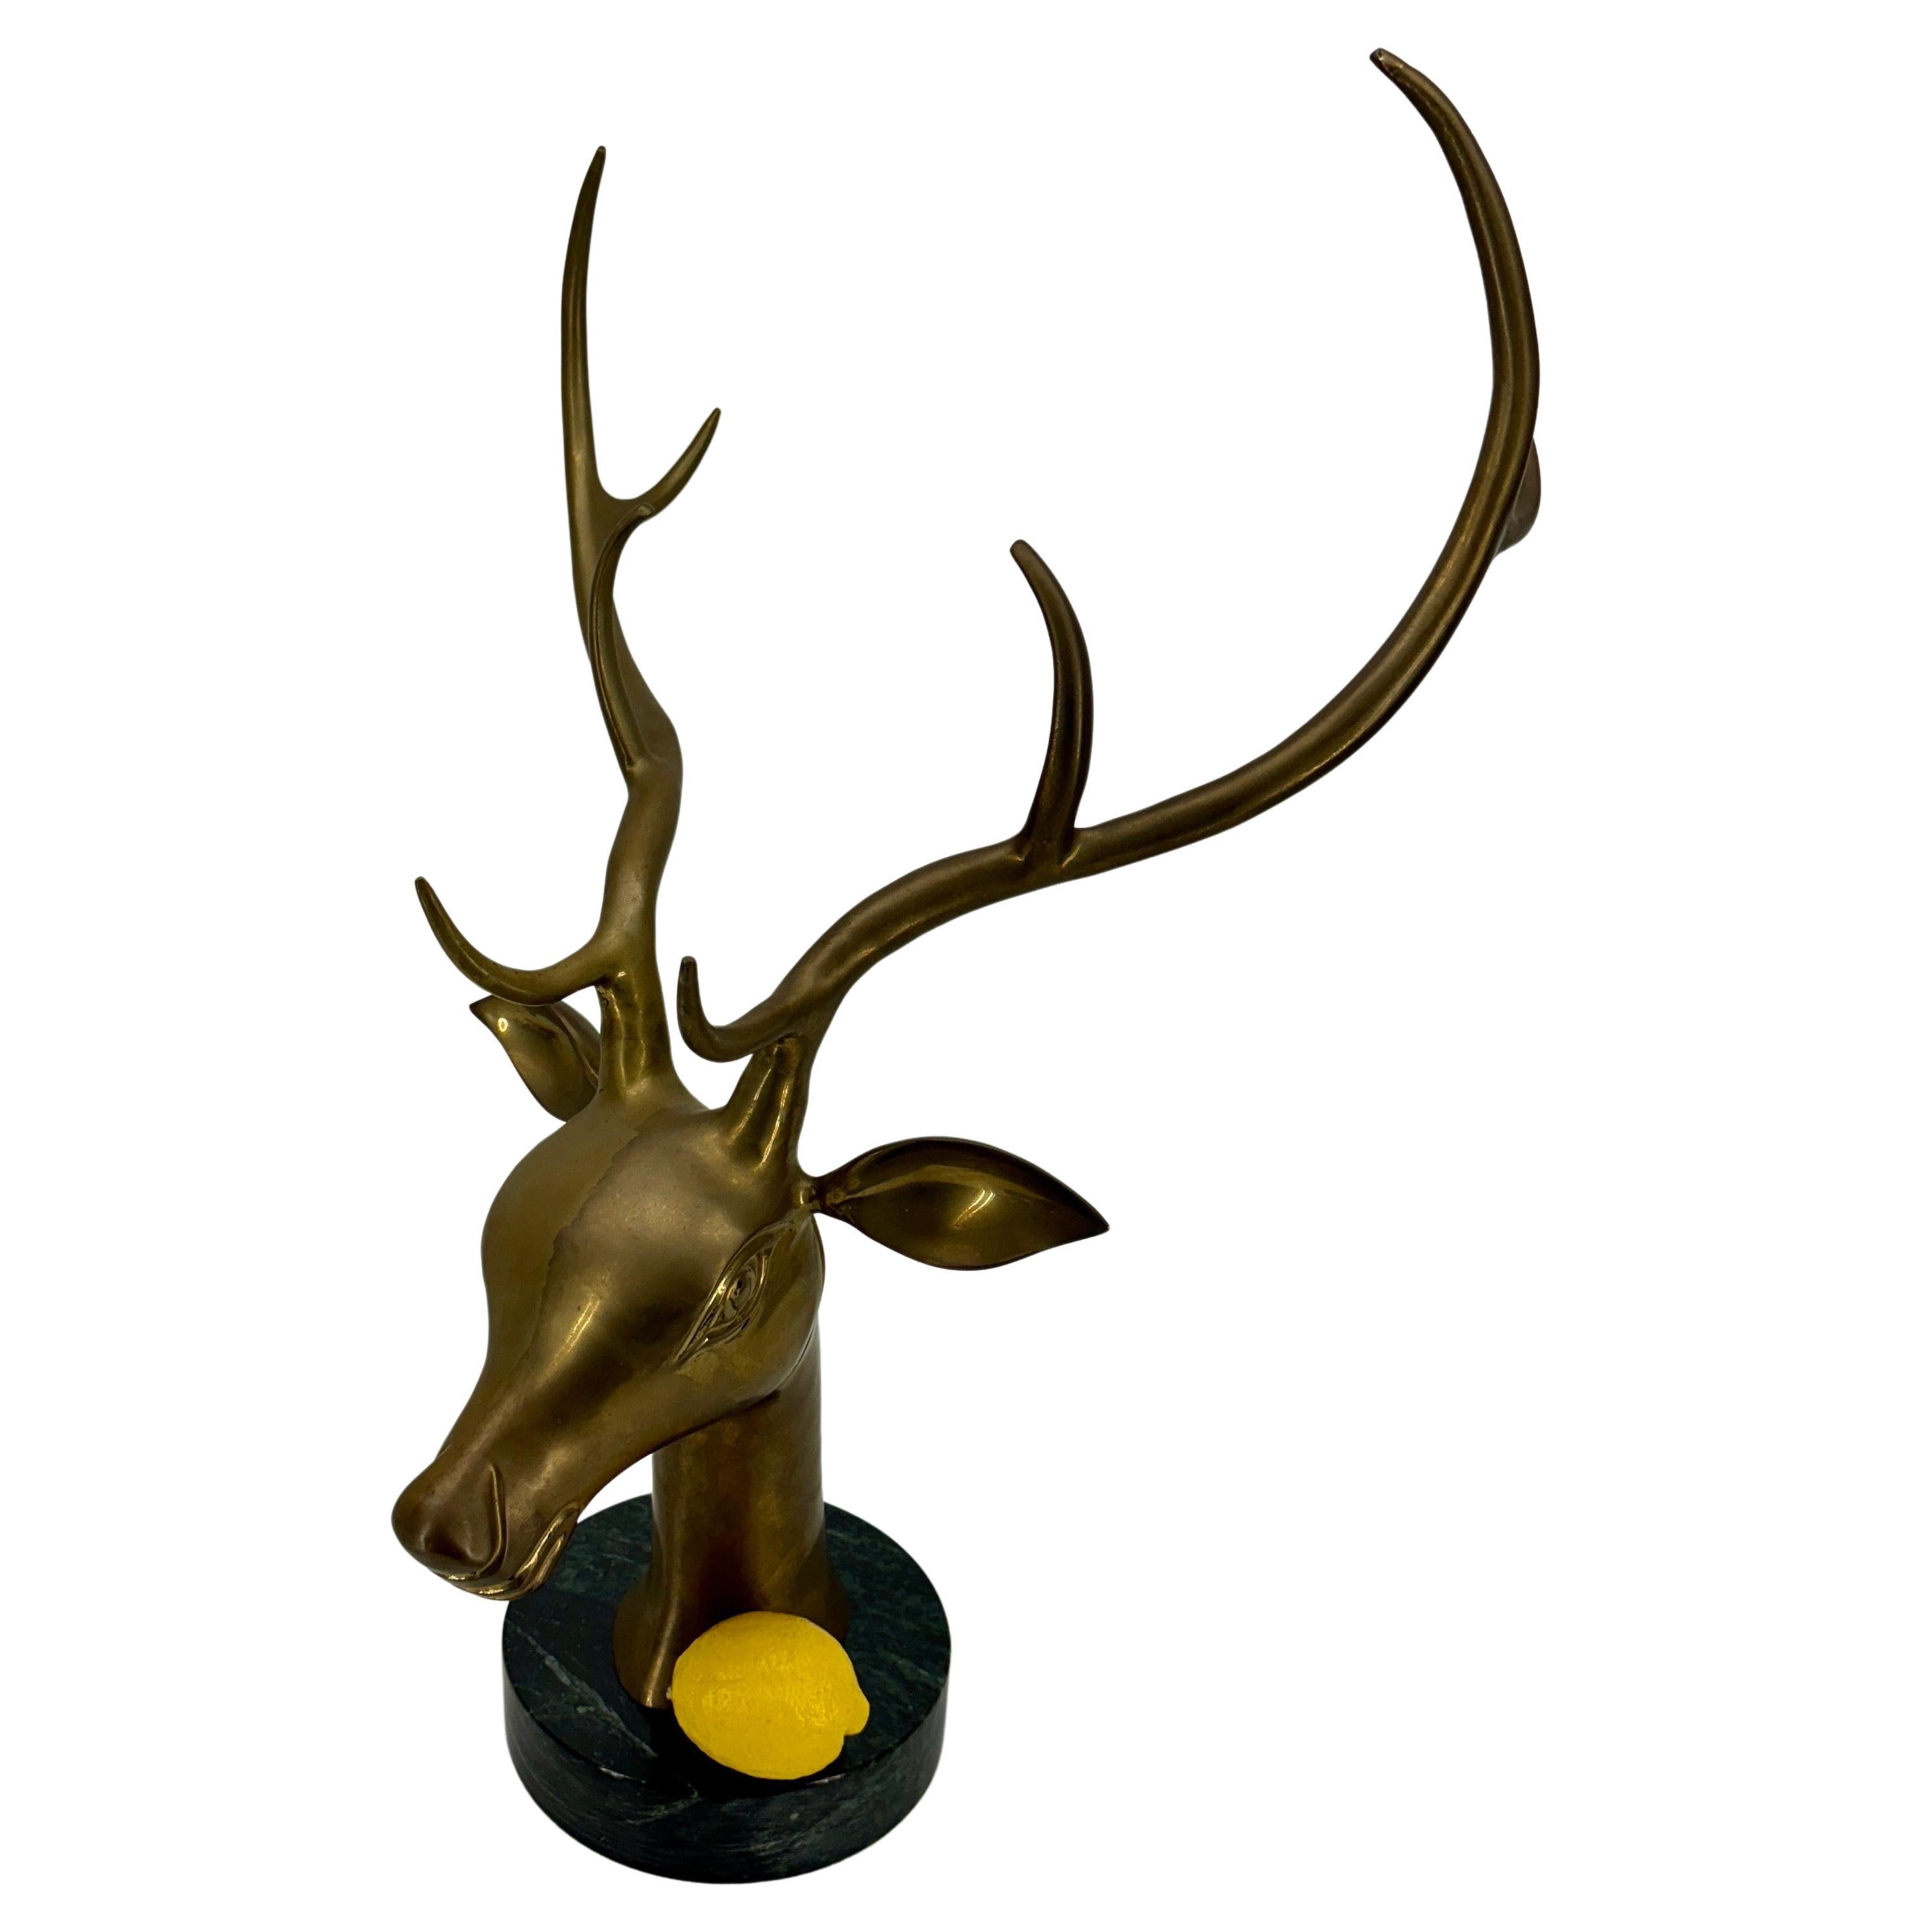 Brass Stag Deer Head with Antler on Marble Base MCM

Stunning large stag bust sculpture on a marble base. This decorative object certainly makes a statement either in a formal or informal home setting displayed on a coffee table as well as a home